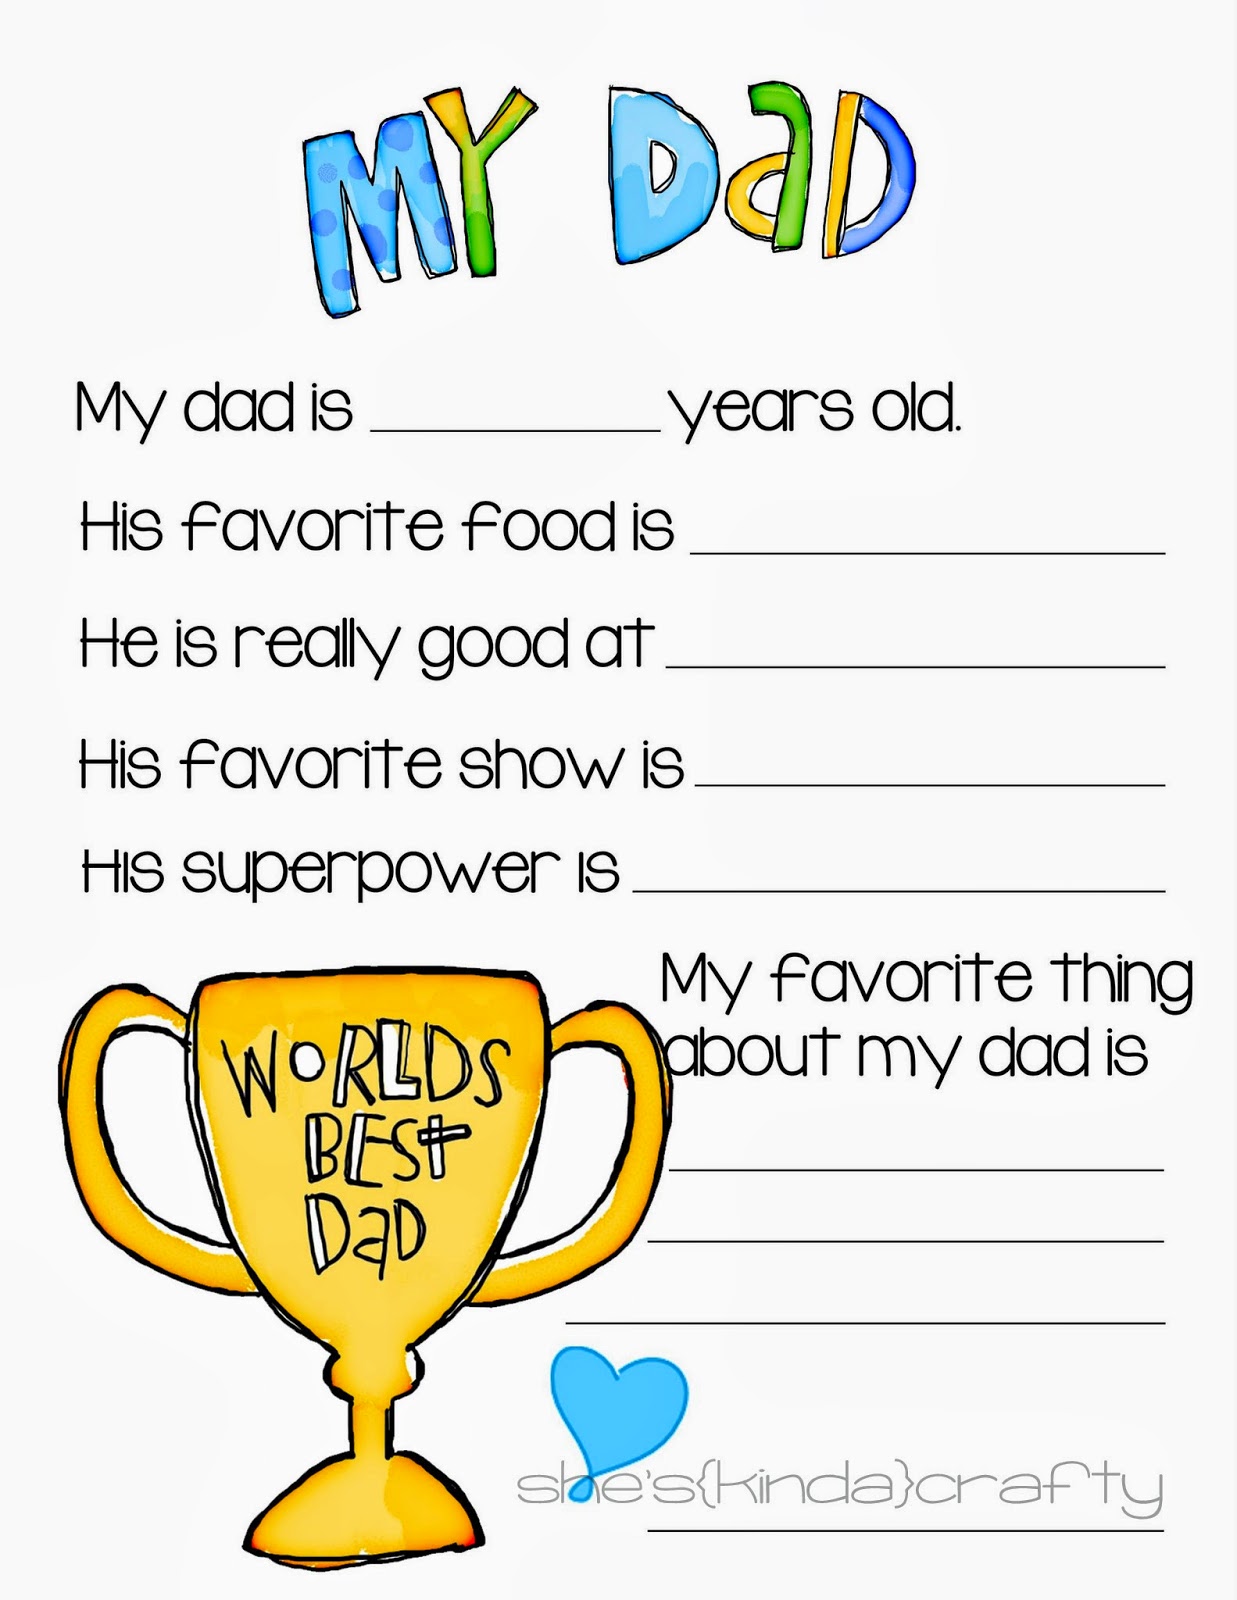 Time For A Quiz Father s Day Free Printables Shes kinda Crafty